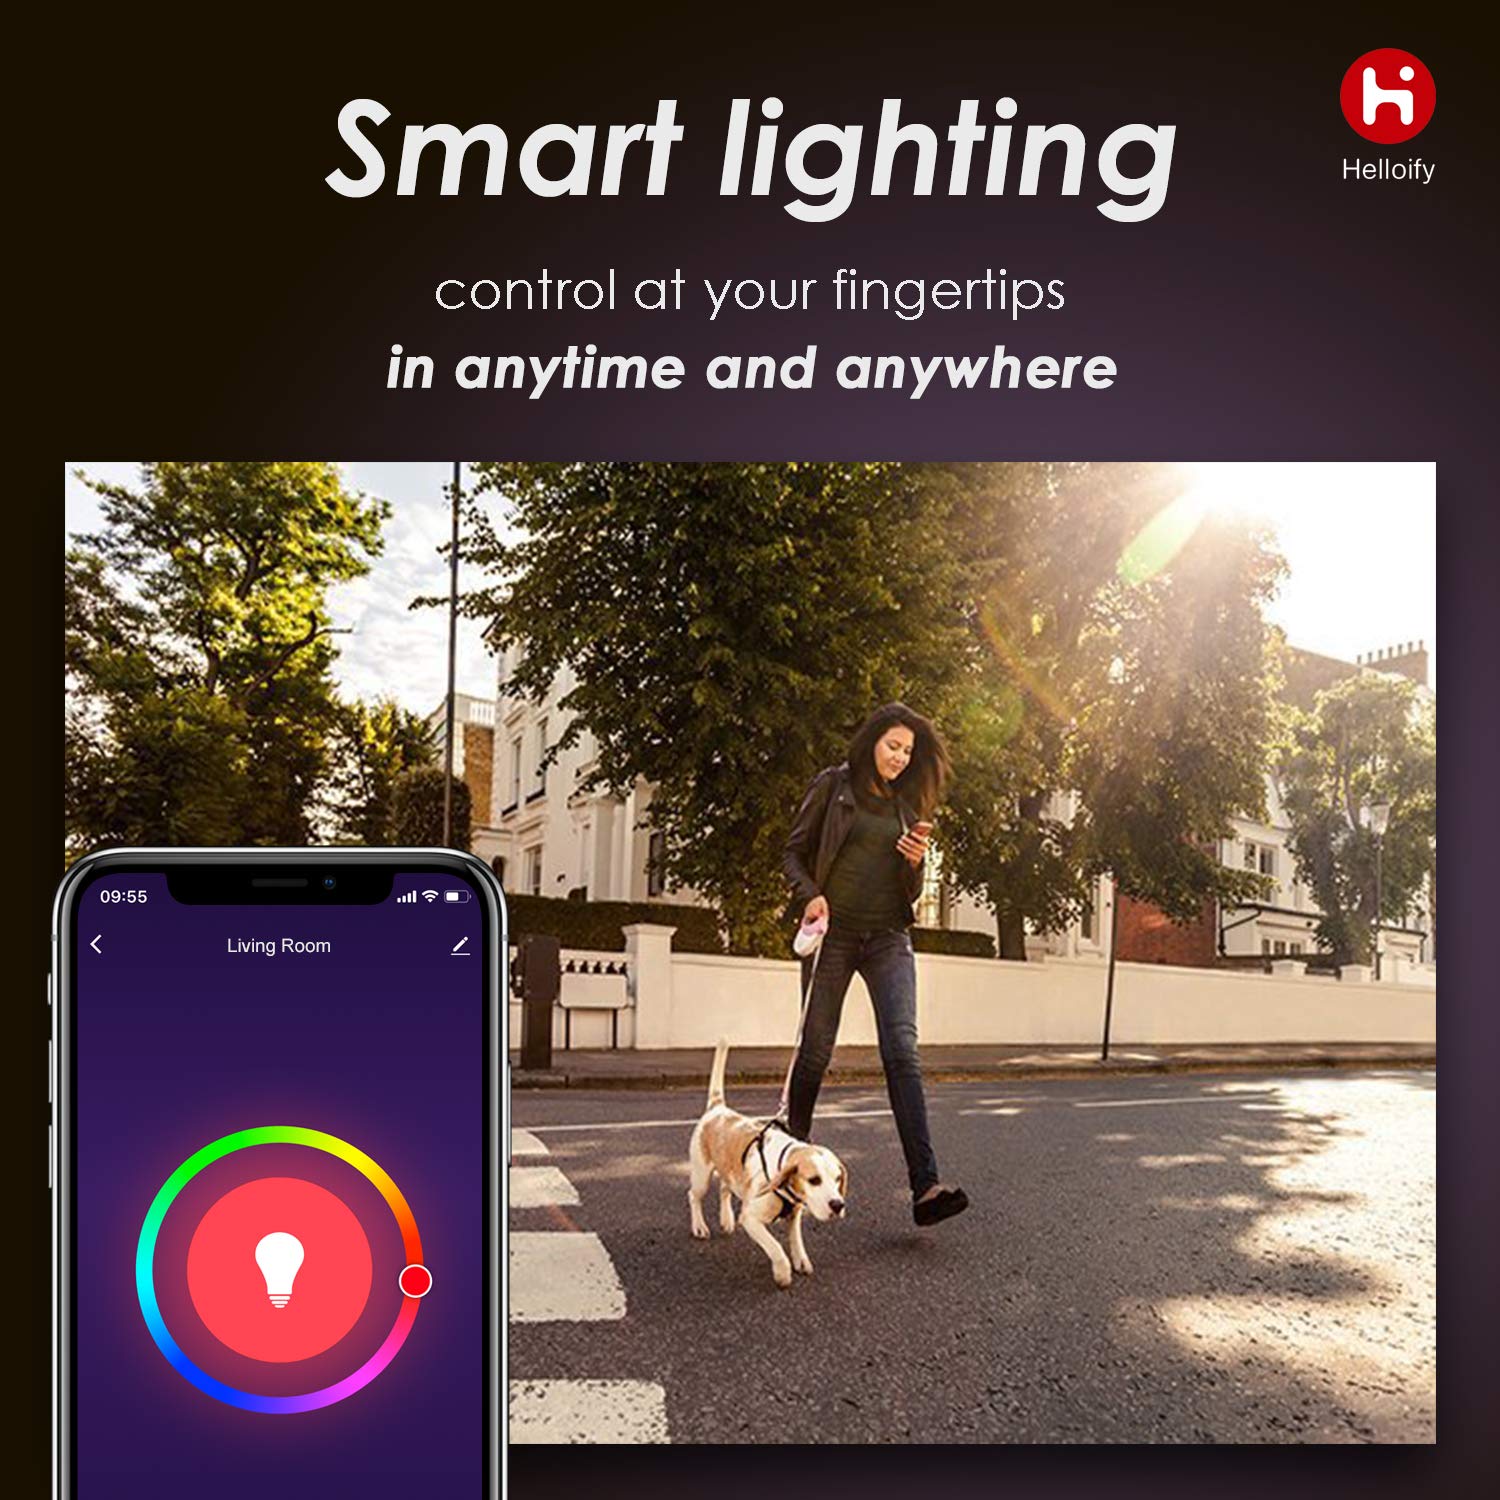 helloify B11 LED Smart, WiFiLight Candelabra Bulb Compatible with Alexa Google Home, RGBCW Color Changing, Cool Warm White Dimmable, No Hub Required, 40WEquivalent, RGB2700K-6500K, 2 Count (Pack of 1)